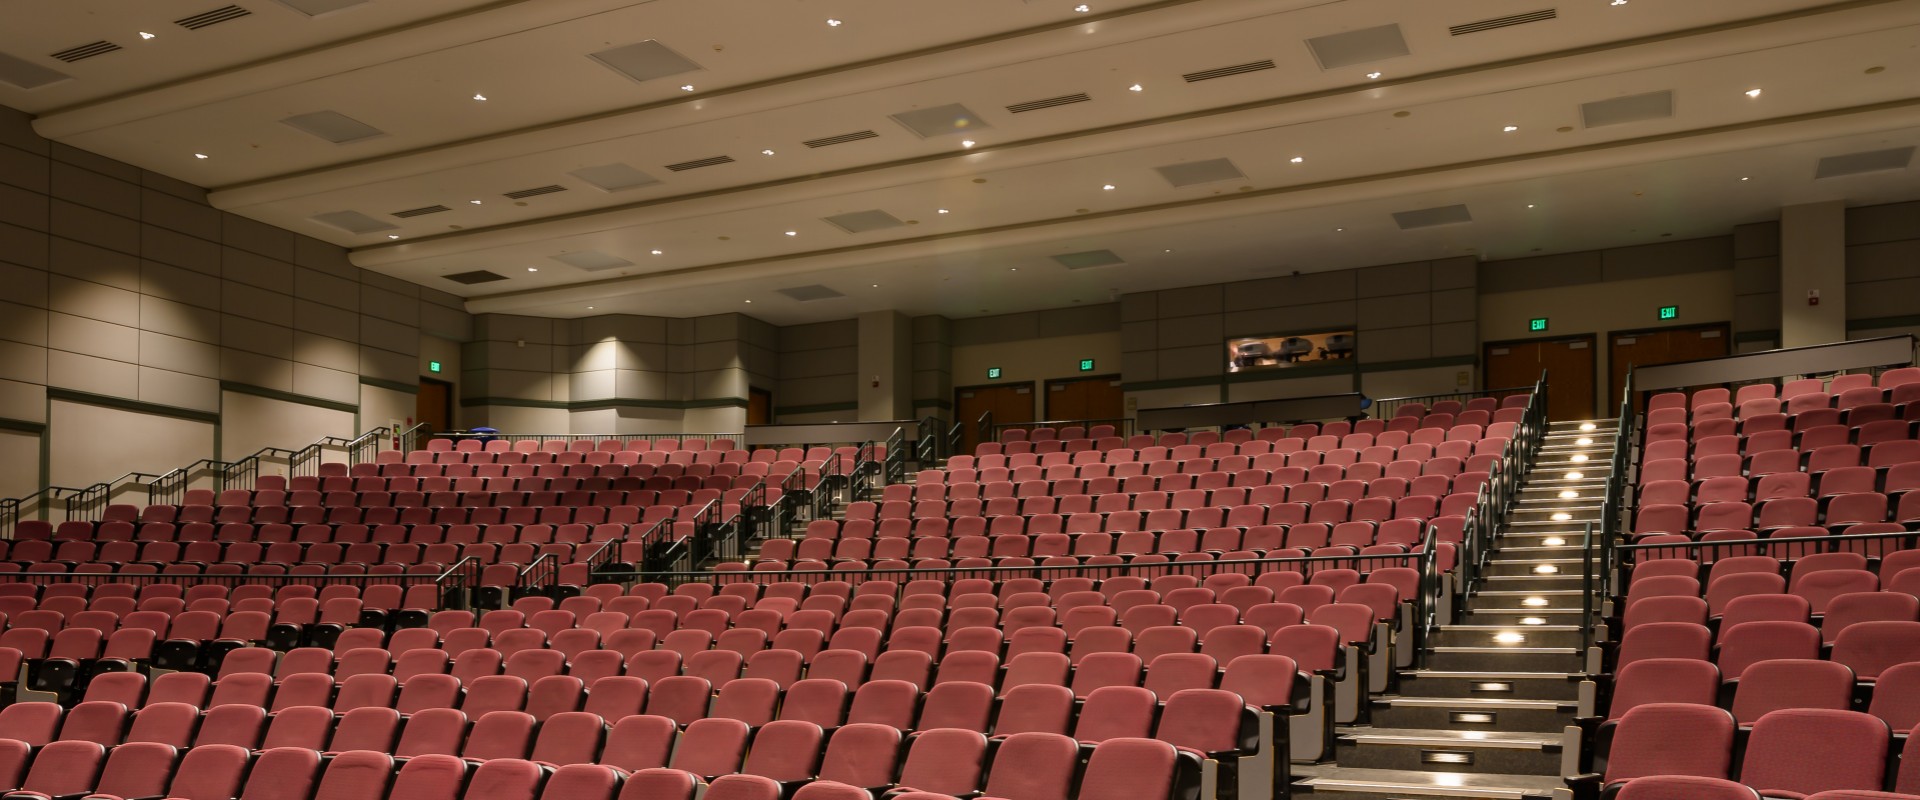 LED Downlights for Penn State’s Premier Lecture Hall